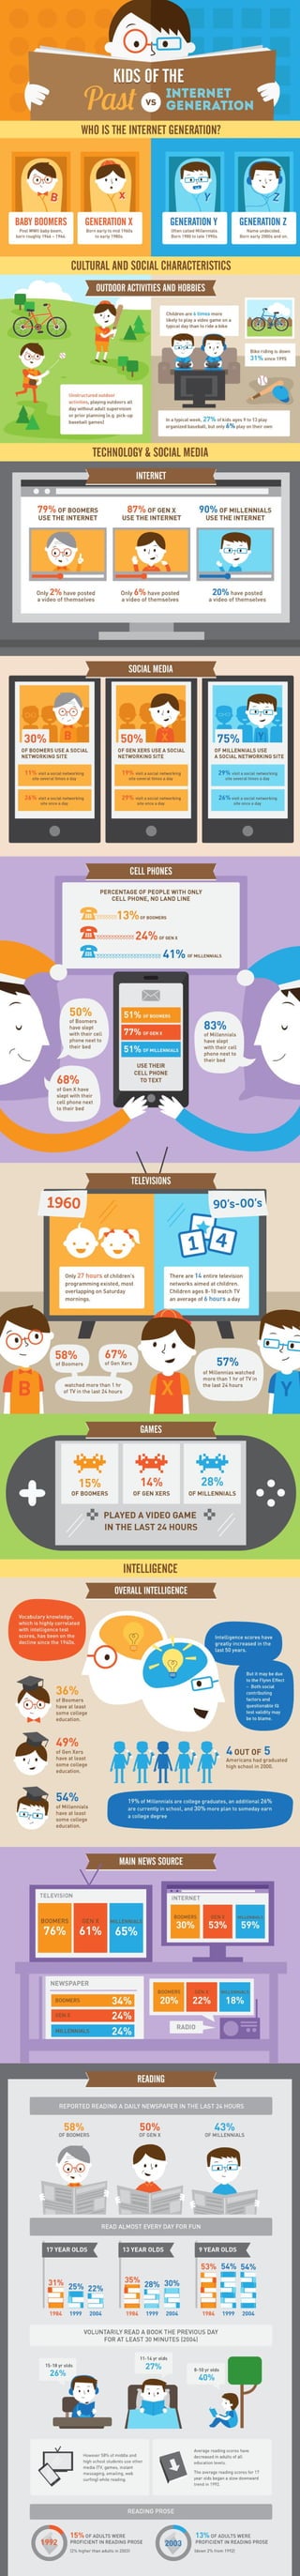 Kids of-the-past-vs-internet-generation-infographic